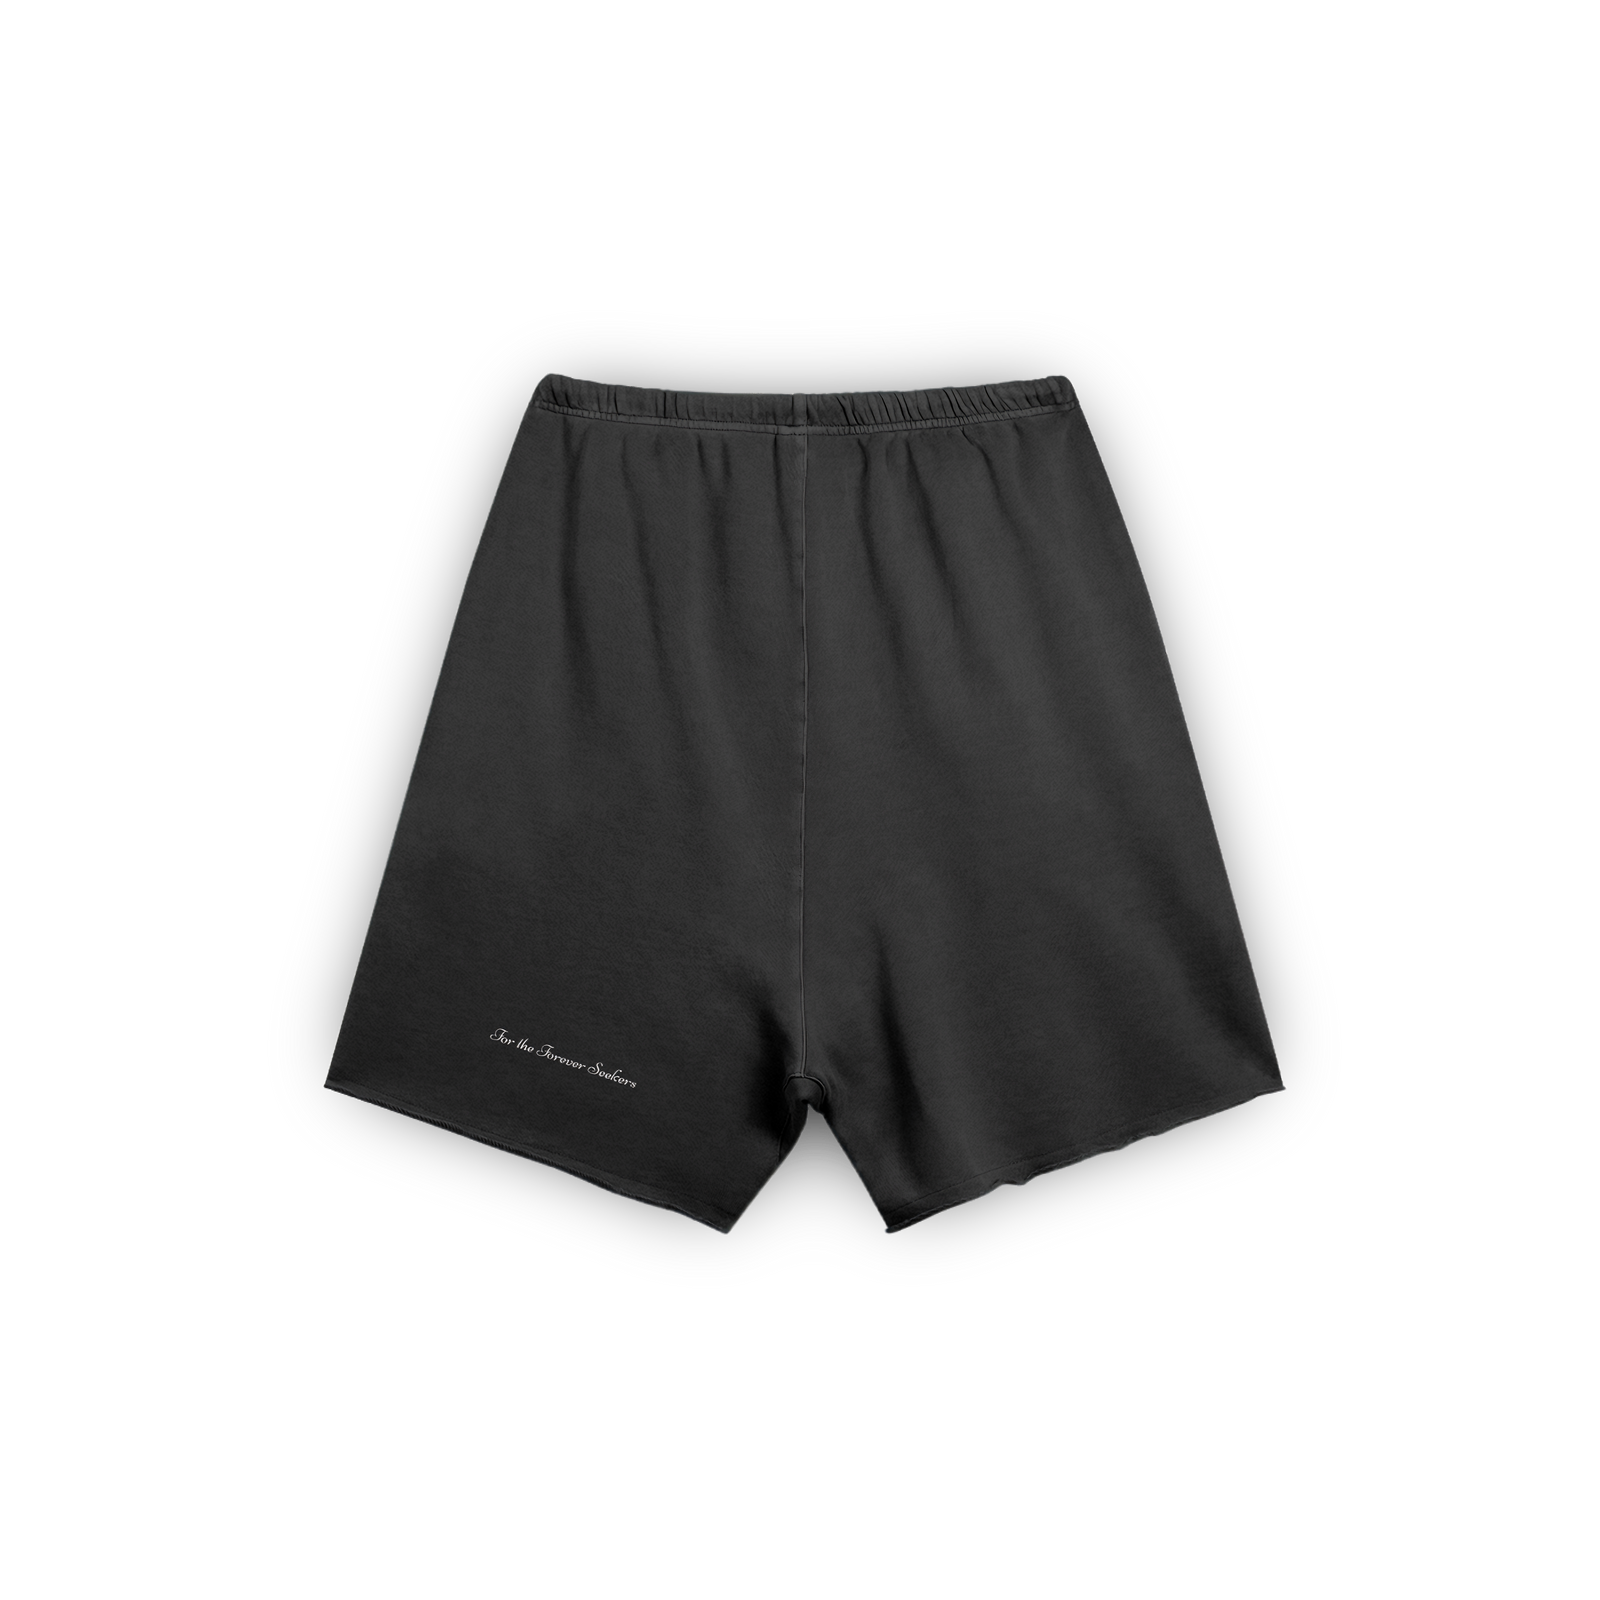 Washed Shorts "For Seekers"